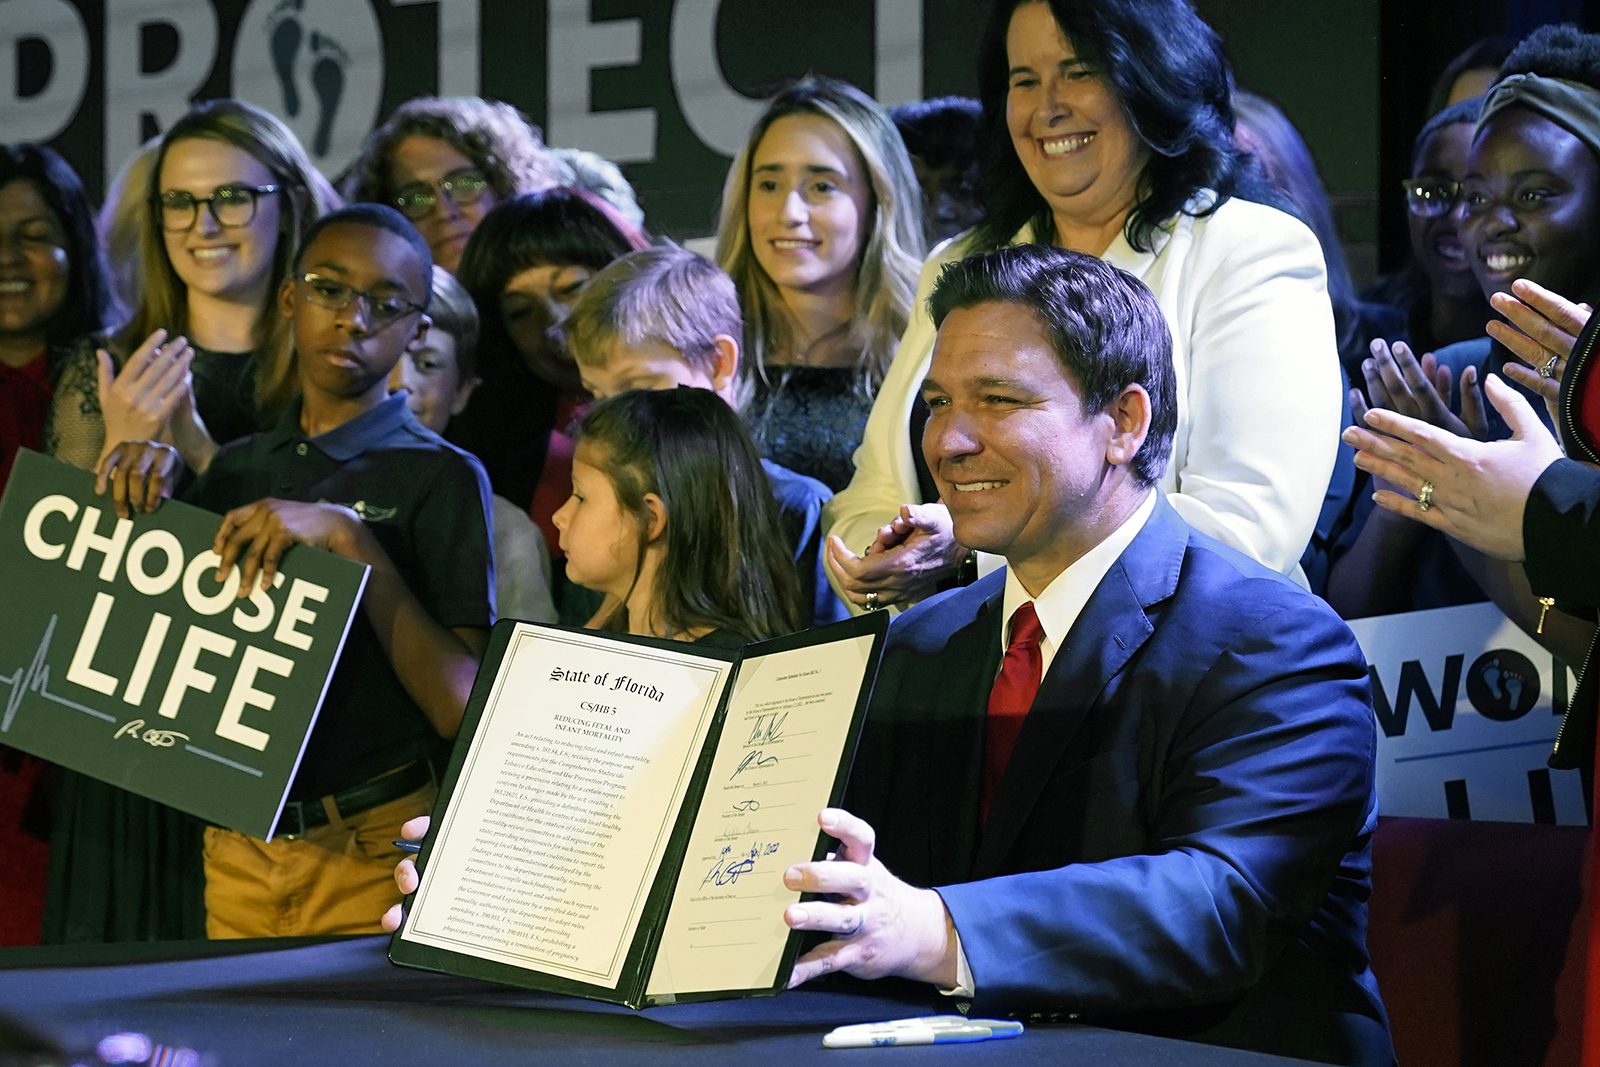 Florida Gov. Ron DeSantis holds up a 15-week abortion ban law after signing it on April 14, 2022, in Kissimmee, Fla. (AP Photo/John Raoux)